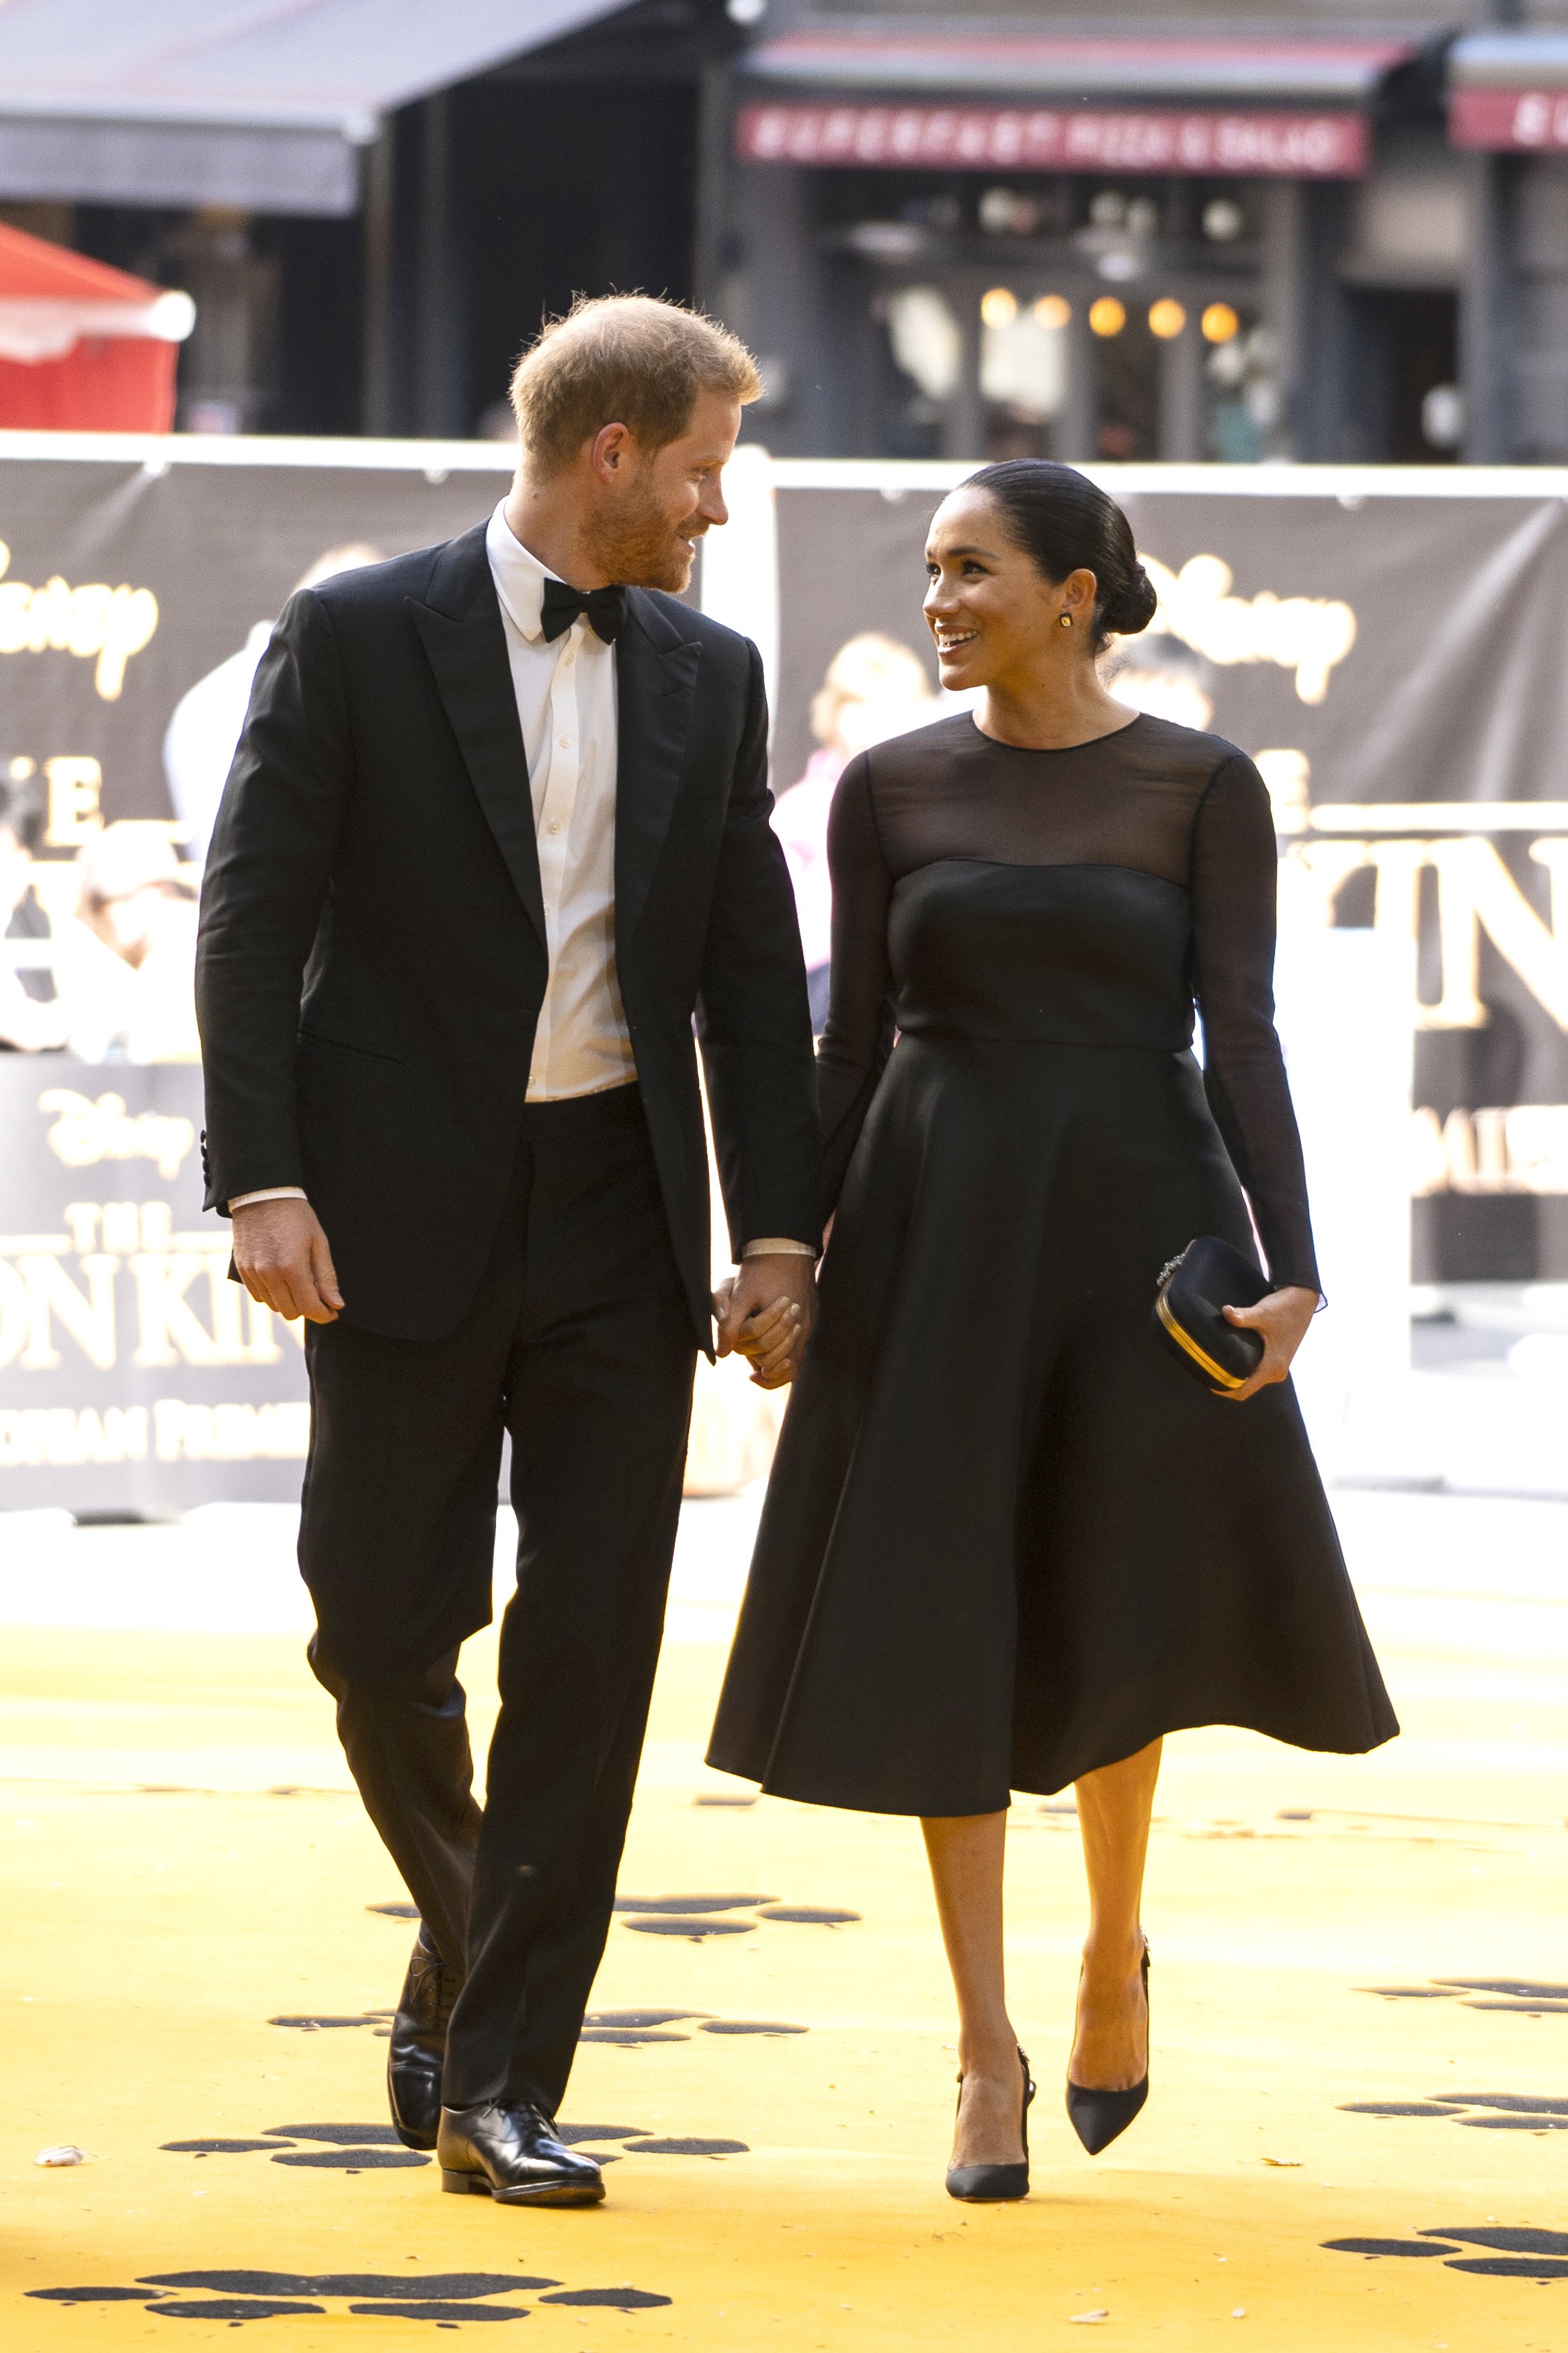 Meghan Markle and Prince Harry attend the premiere of "The Lion King" in the UK in July 2019 | Photo: Getty Images